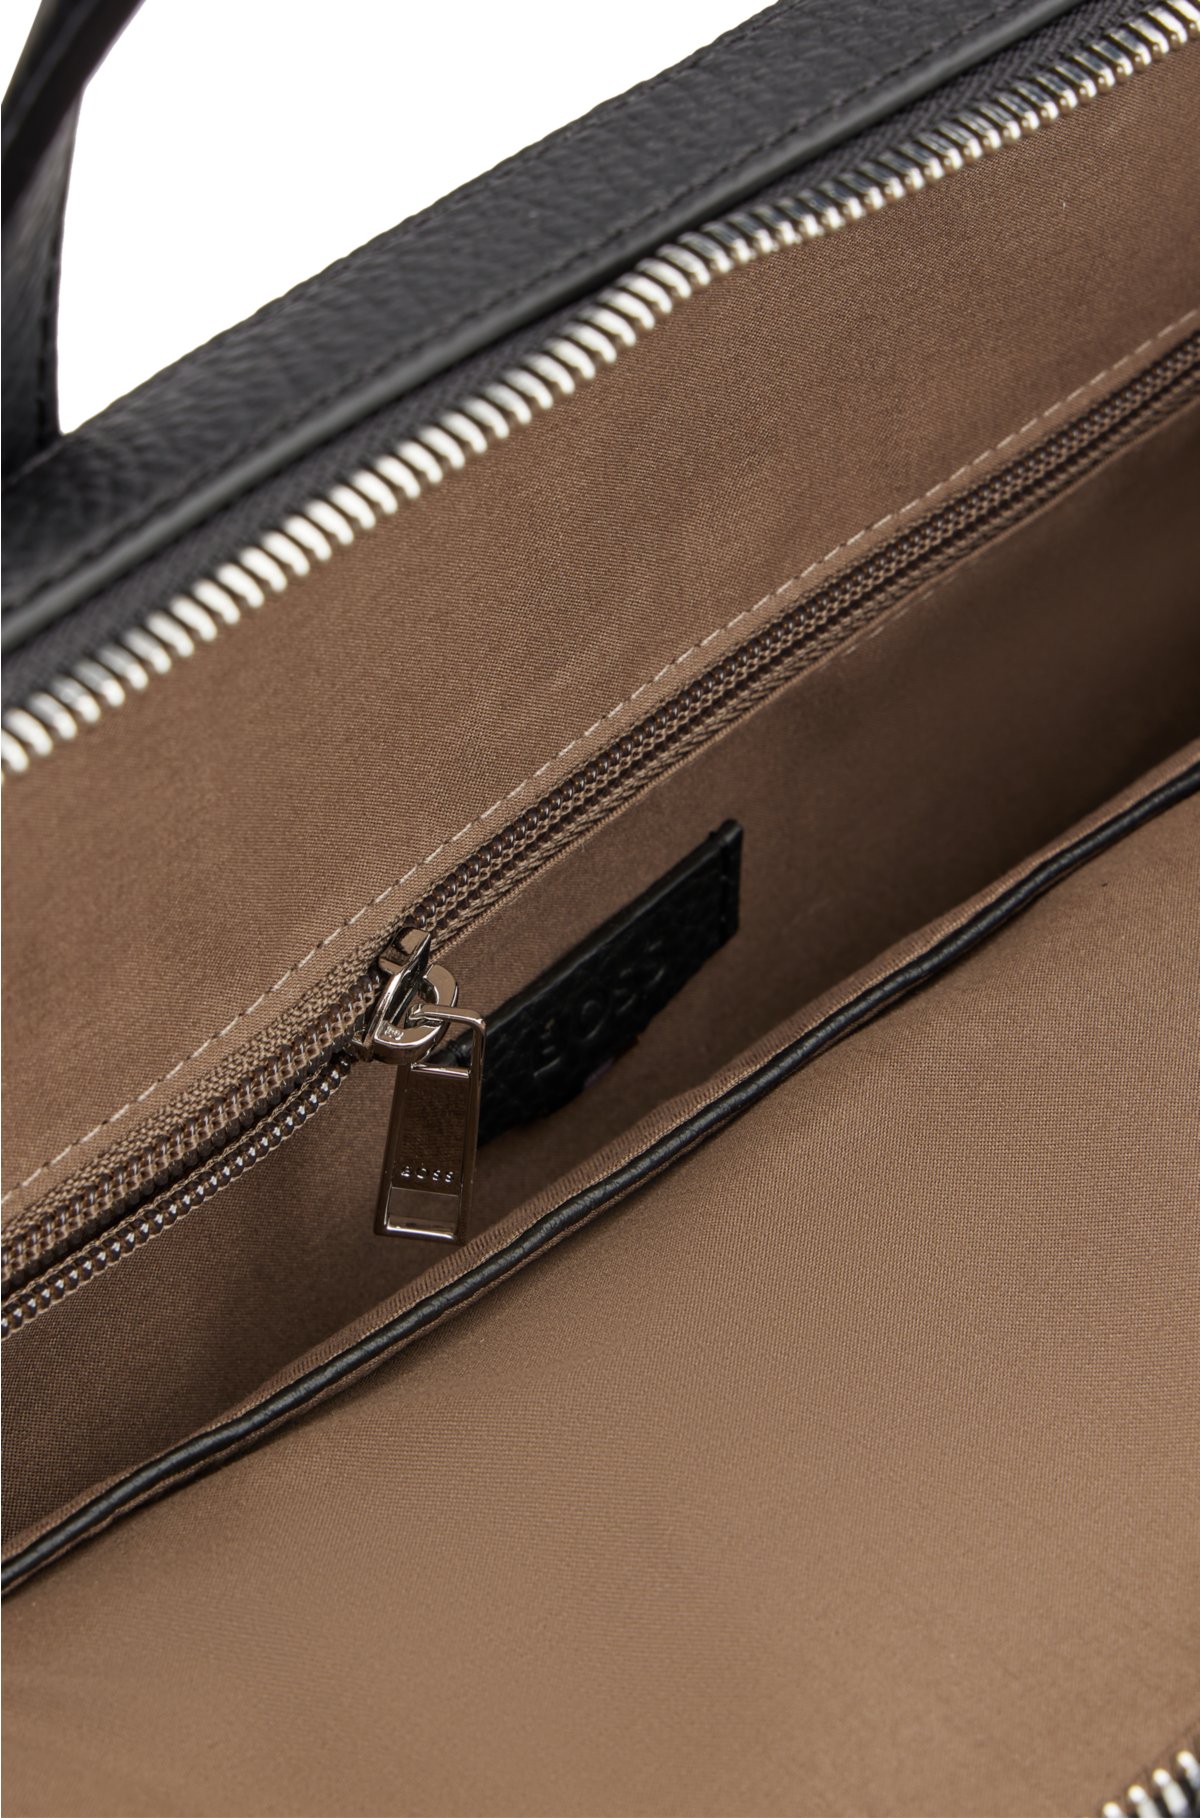 BOSS - Document case in Italian leather with embossed logo